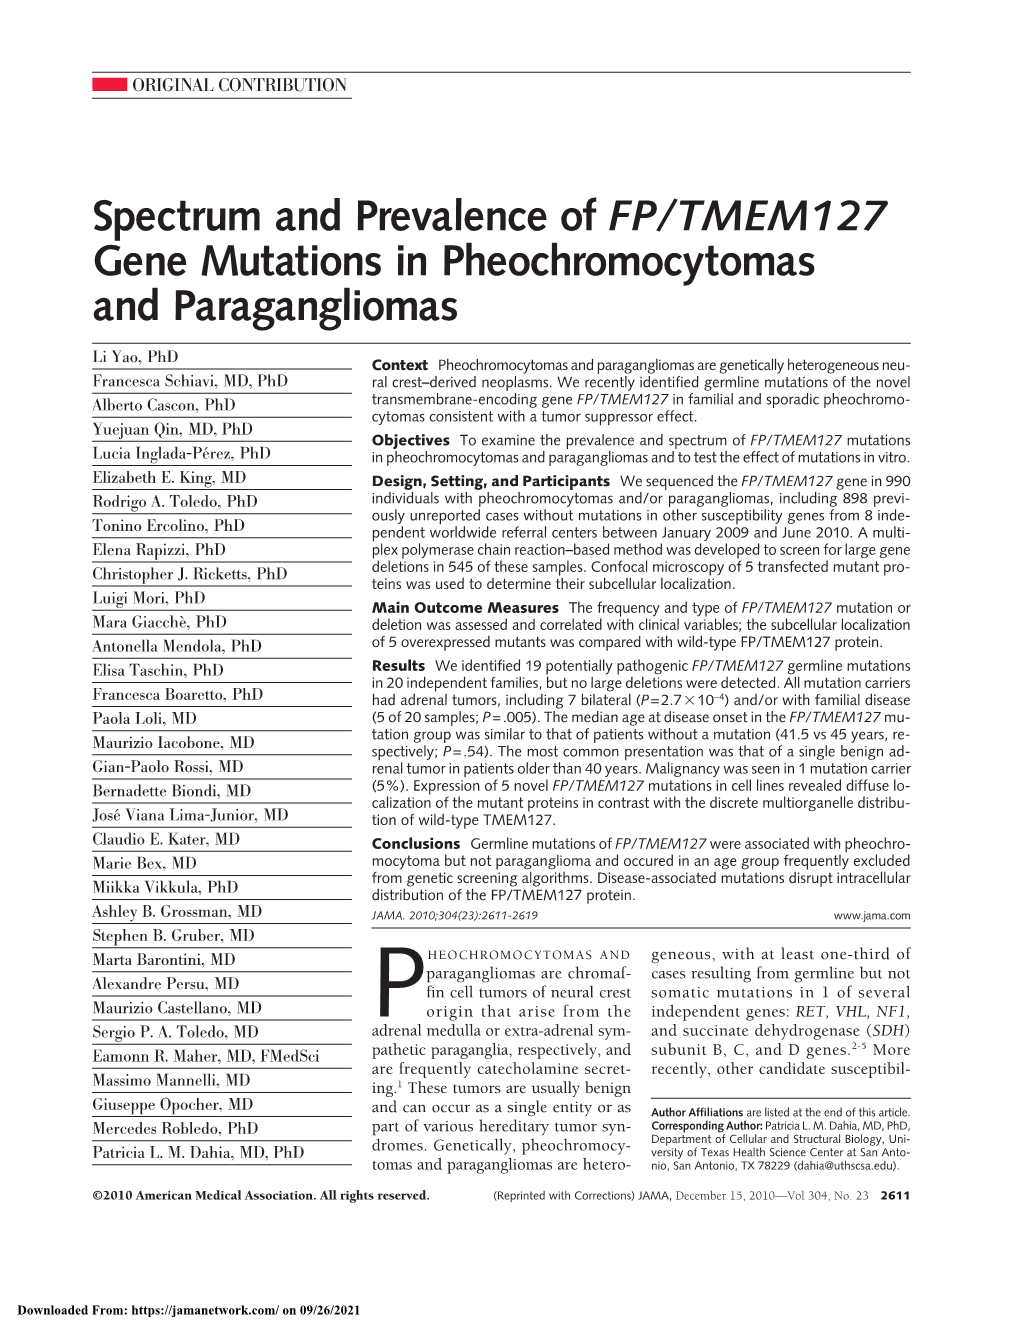 Spectrum and Prevalence of FP/TMEM127 Gene Mutations in Pheochromocytomas and Paragangliomas